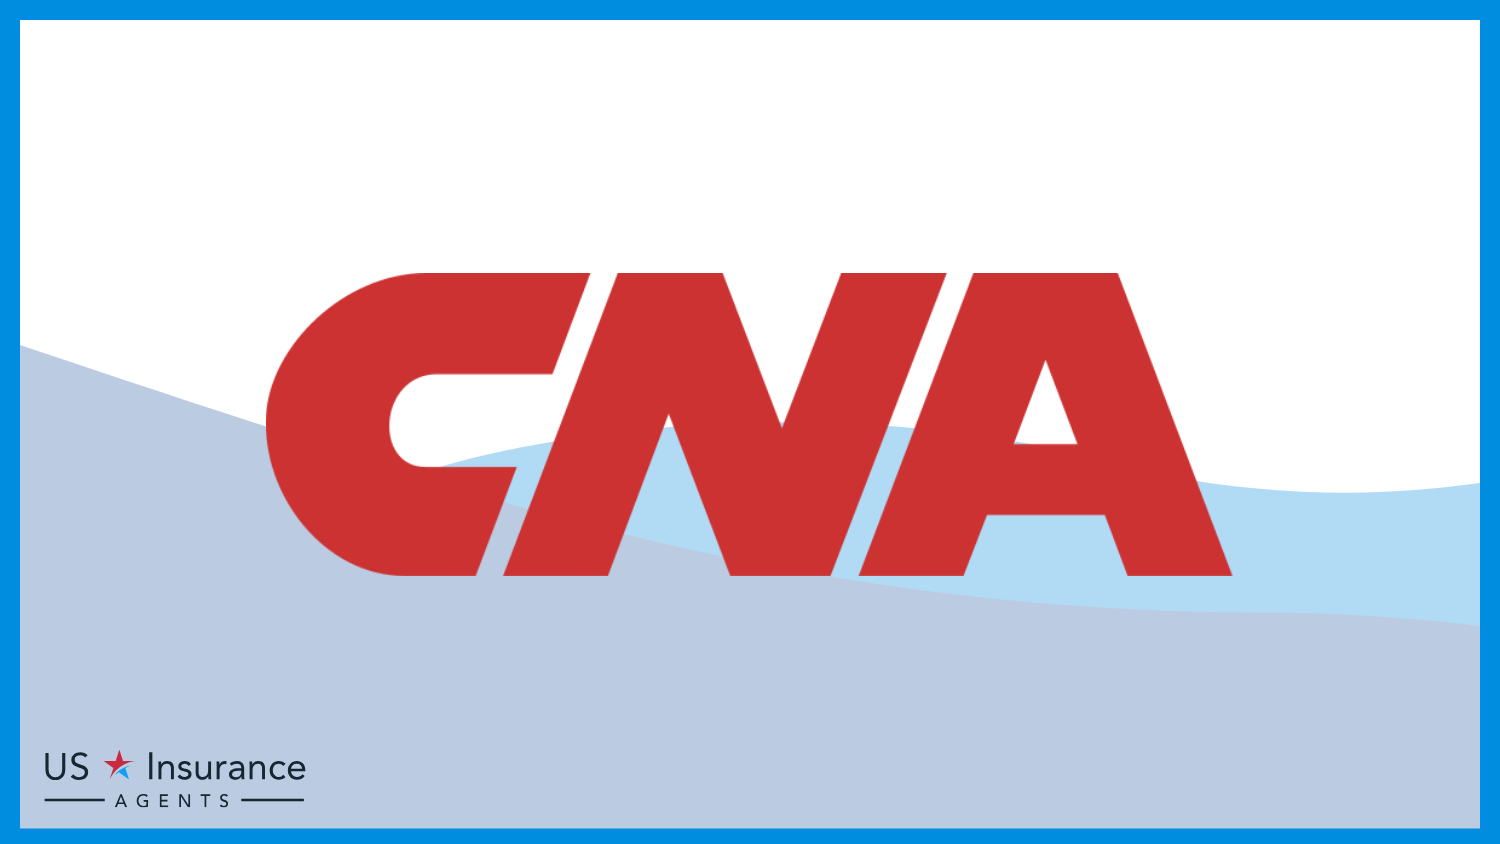 CNA: Best Business Insurance for Live Event Performers